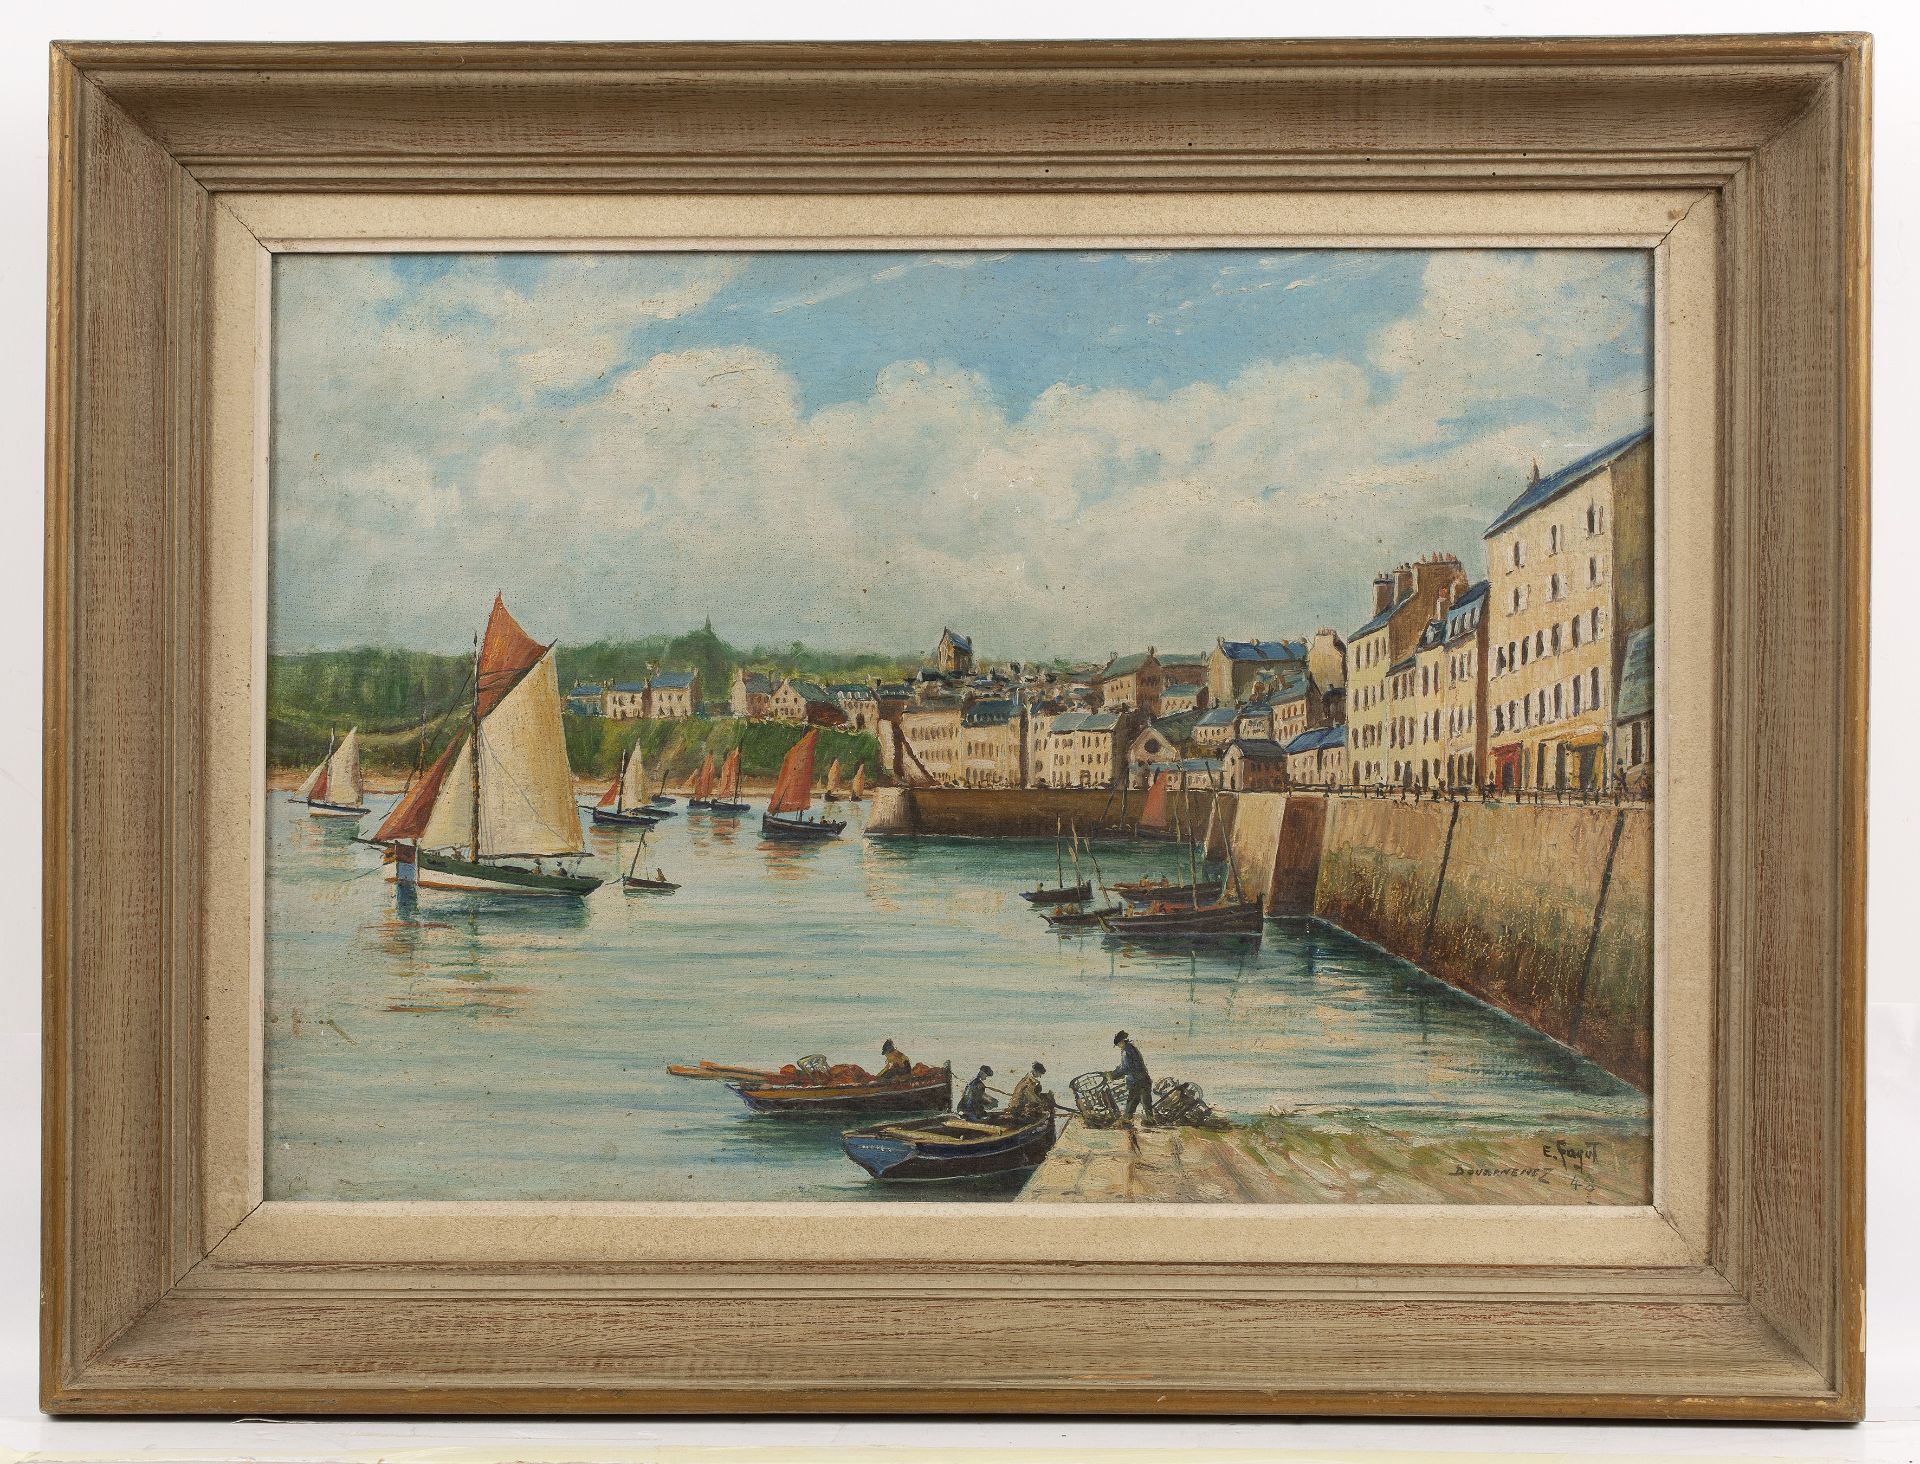 20th Century French School 'Douarnenez harbour', oil on canvas, signed 'E. Fagot', and dated 1948 - Image 2 of 3